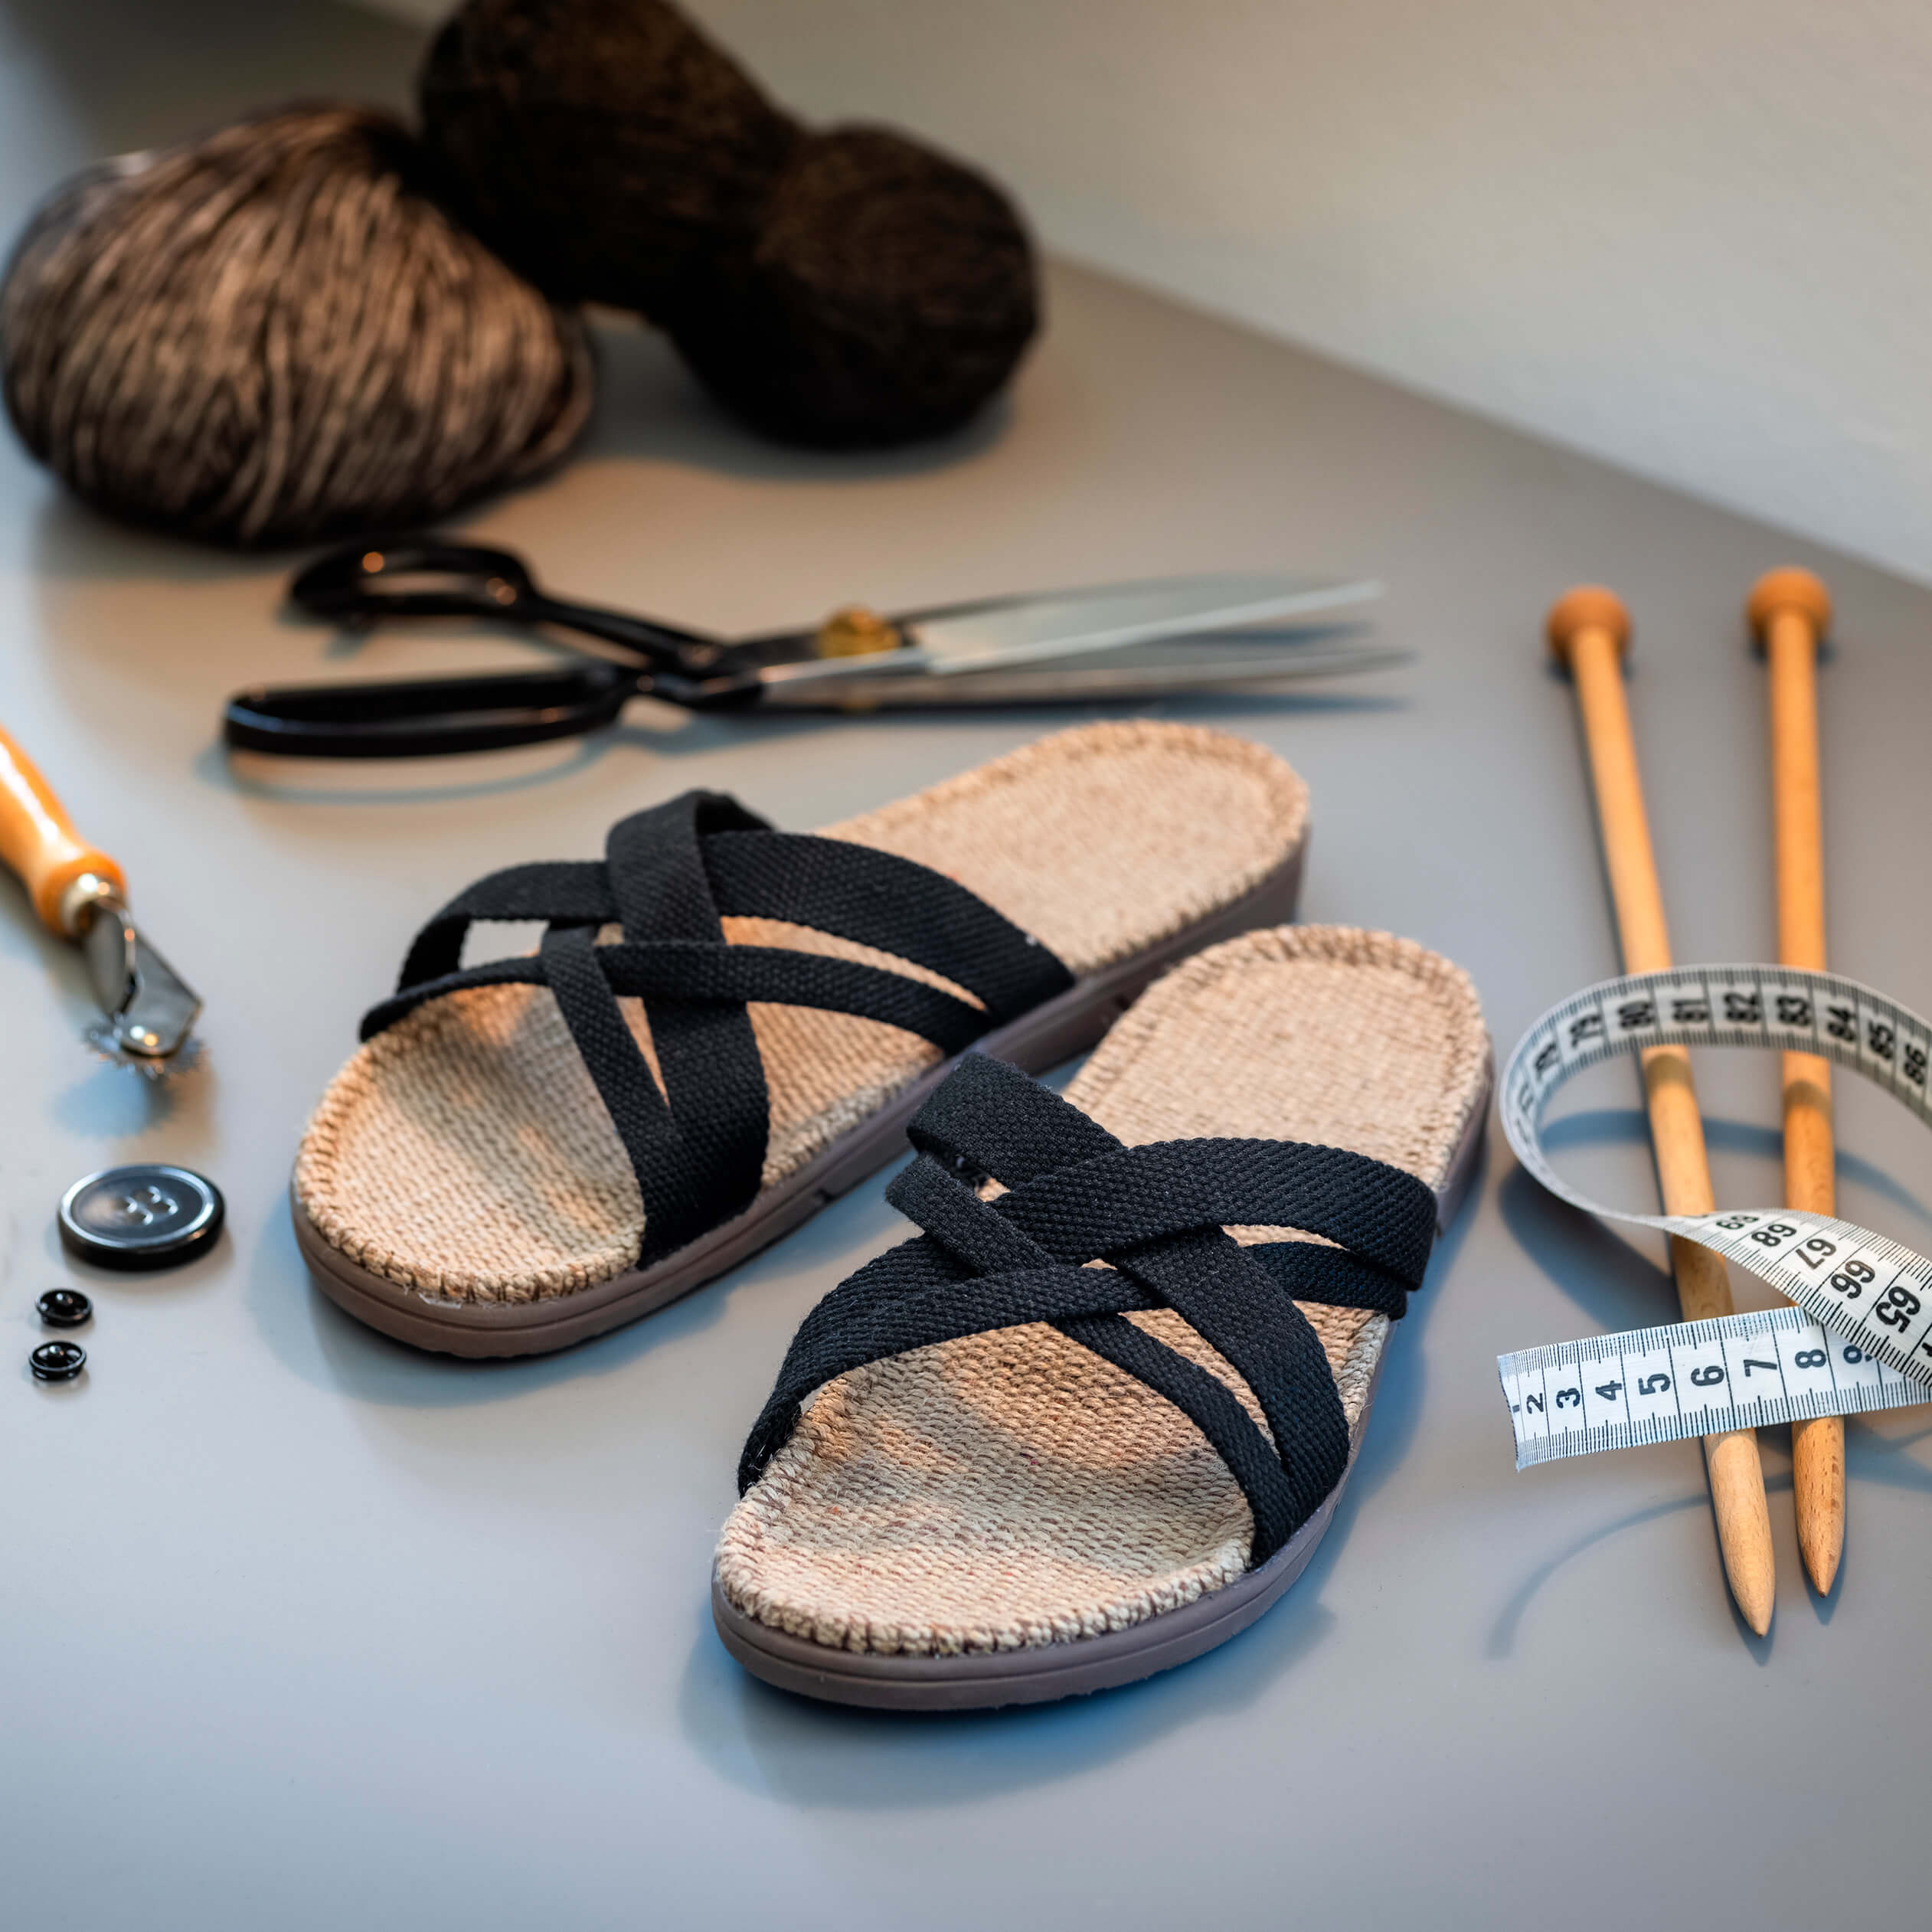 A pair of black strapped jute sandals sit next to knitting supplies on a grey background